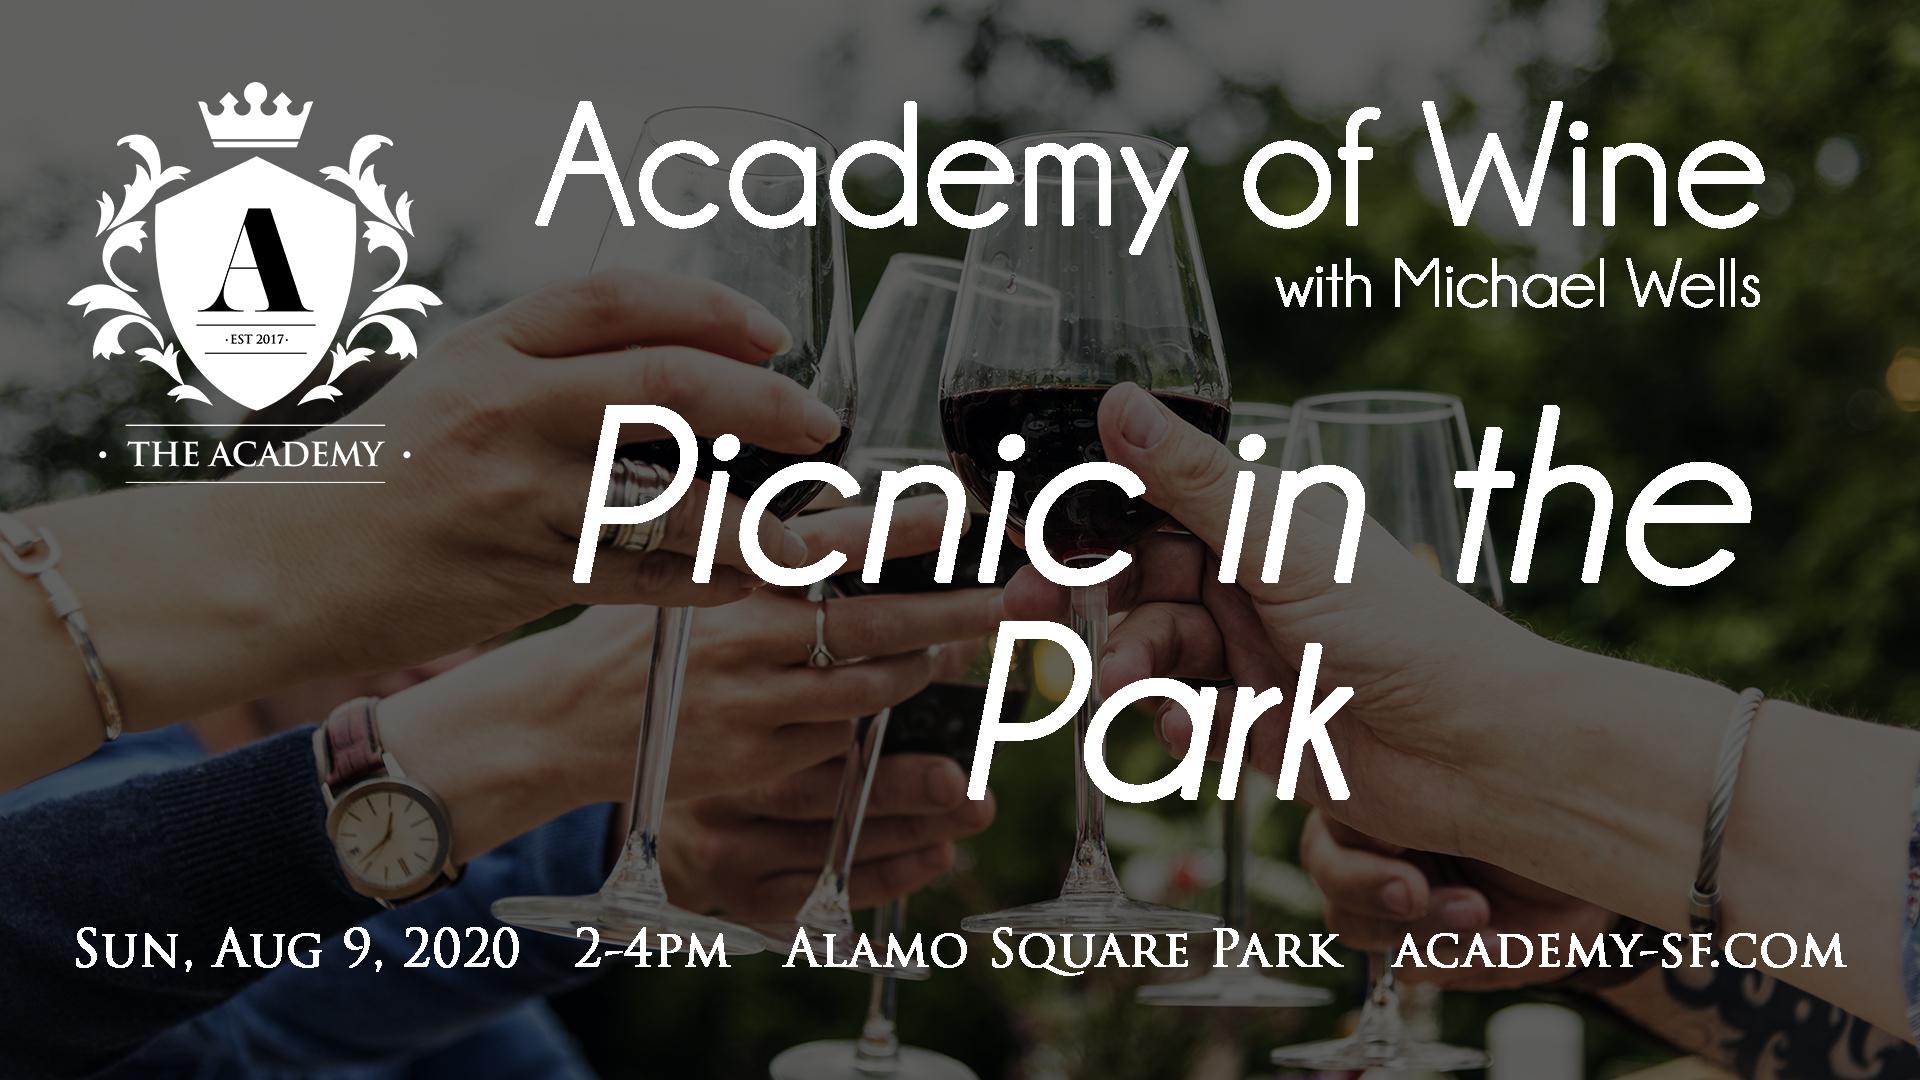 Academy of Wine: Picnic in the Park